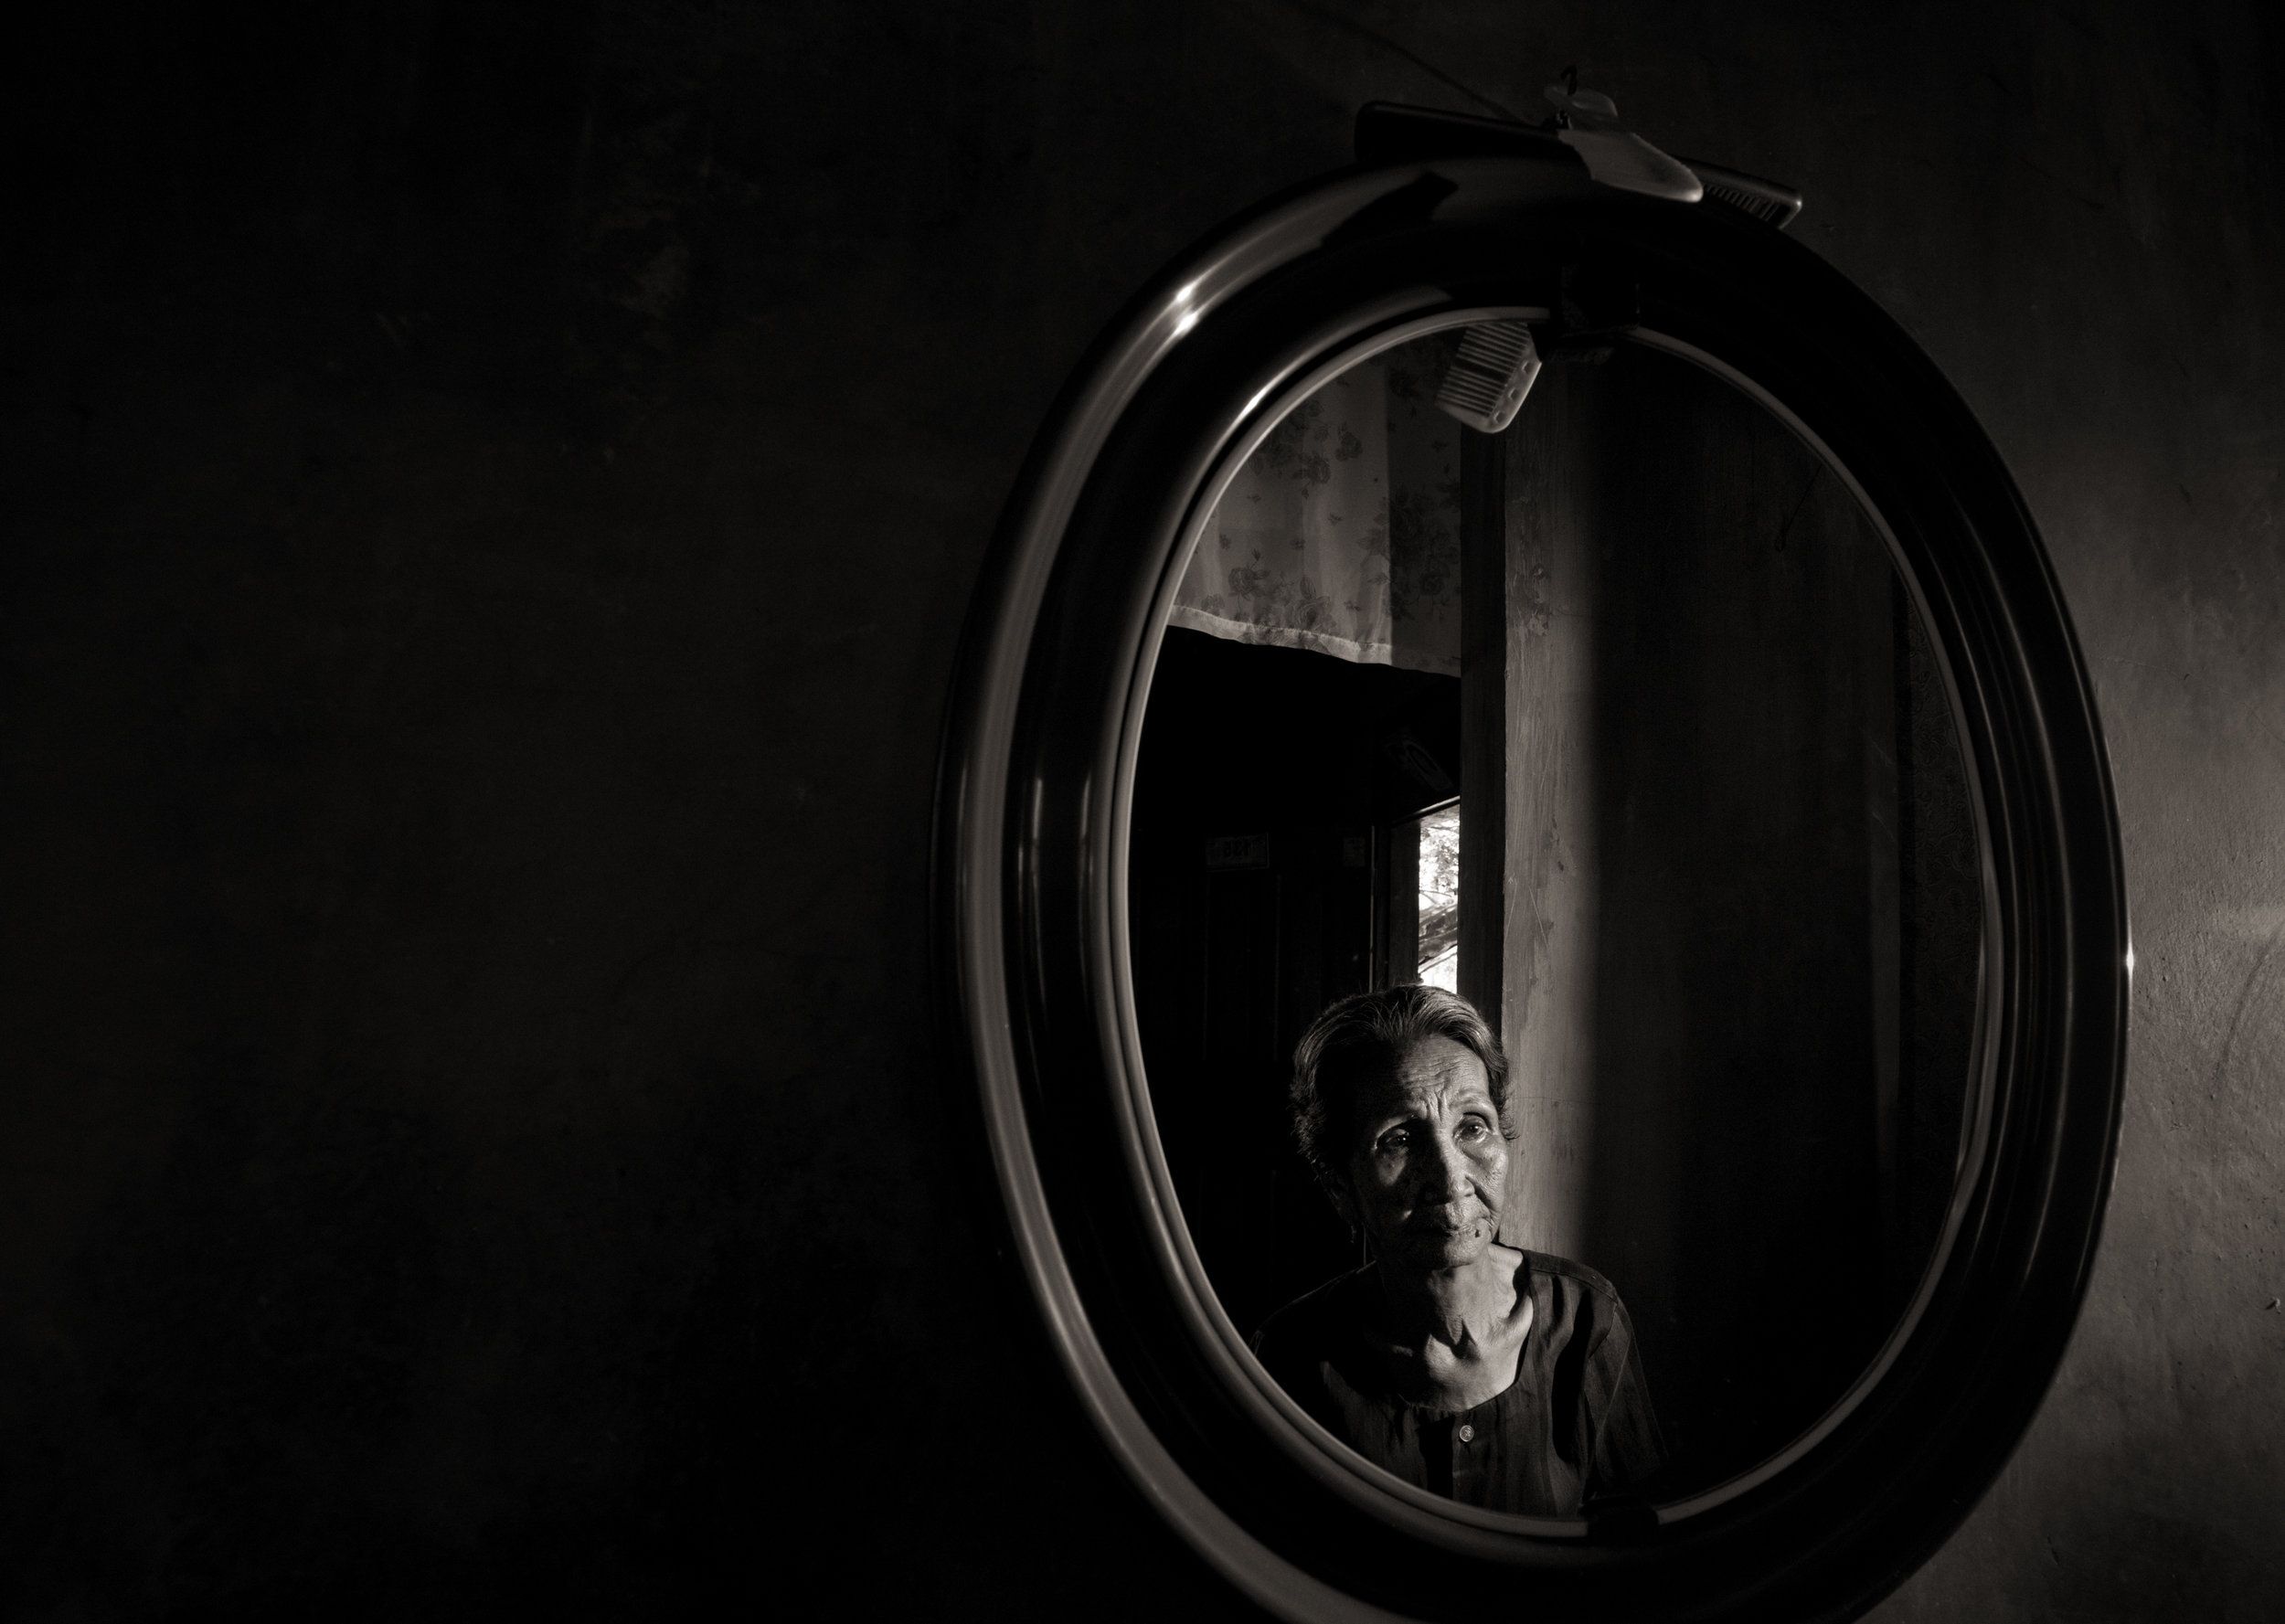 Emilia dela Cruz Mangilit is reflected in a mirror in her home in the village of Mapaniqui. Mangilit was only 15 years old when her village was shelled, then attacked by the Japanese during World War II. Image by Cheryl Diaz Meyer. Philippines, 2019.